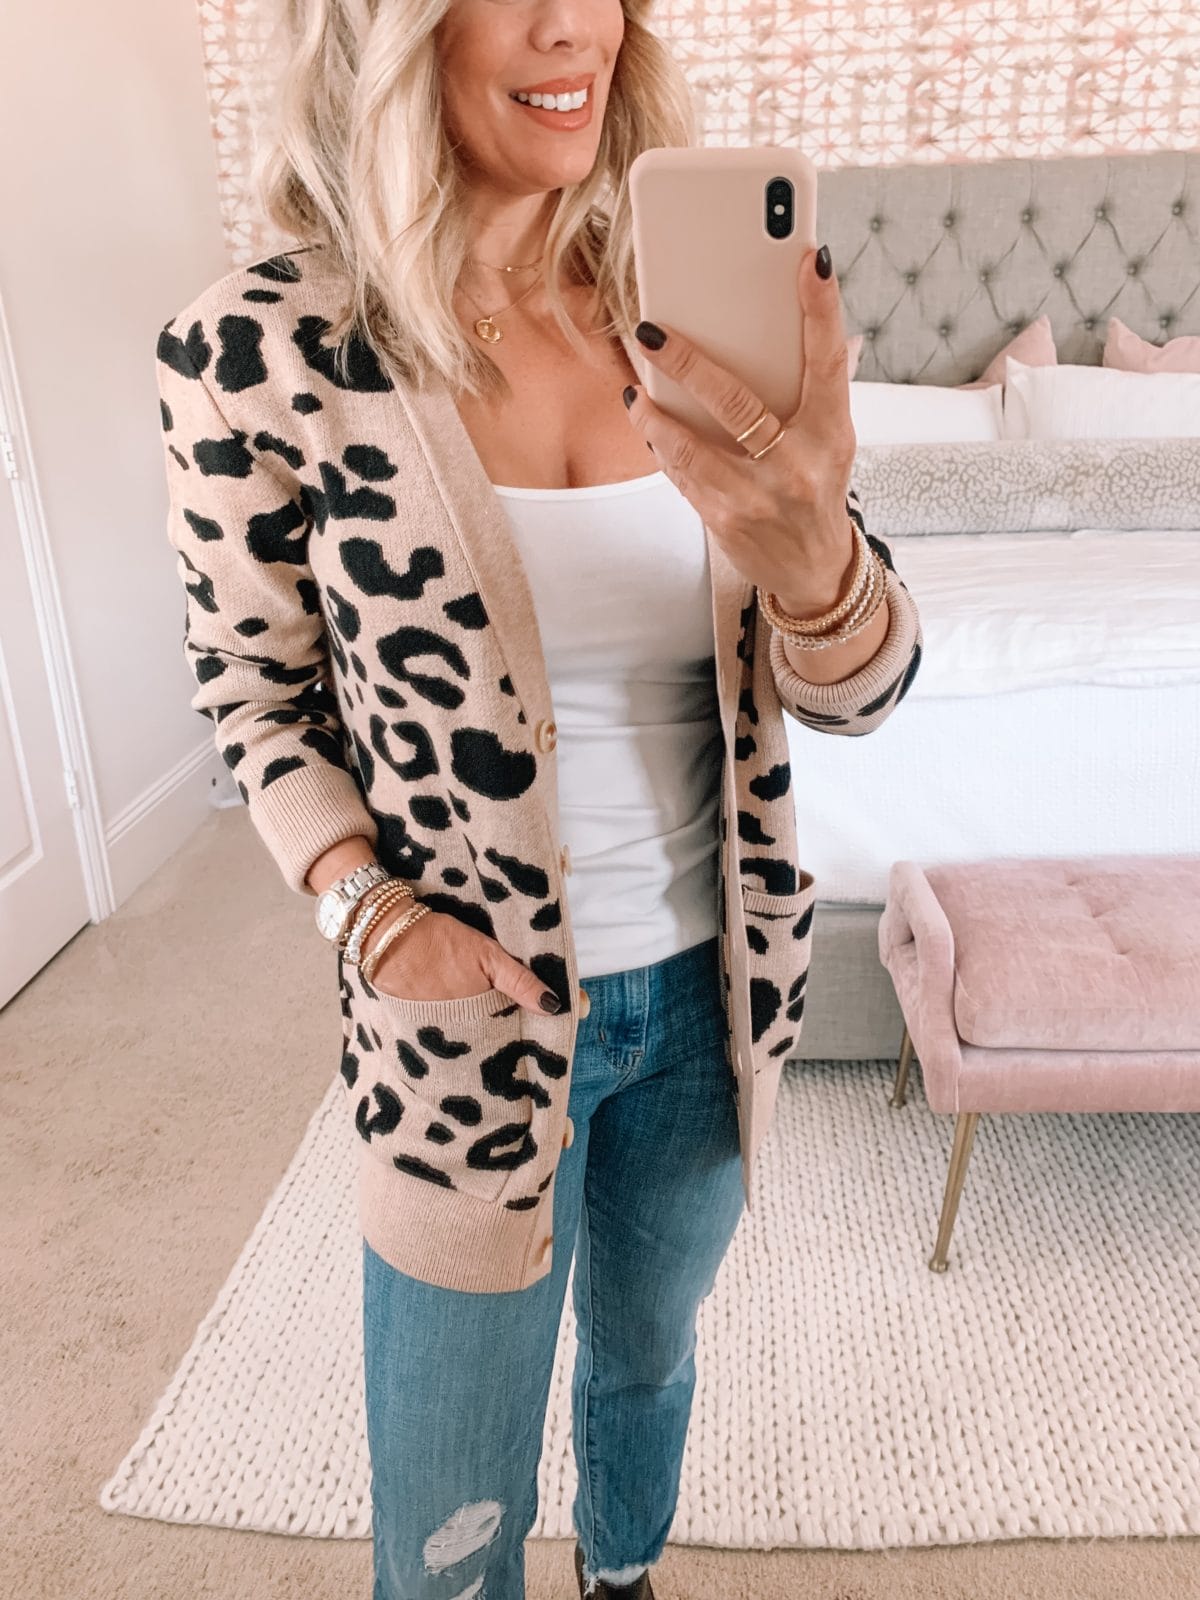 Amazon Fashion Faves, Cami, Leopard Sweater, Jeans, Booties 